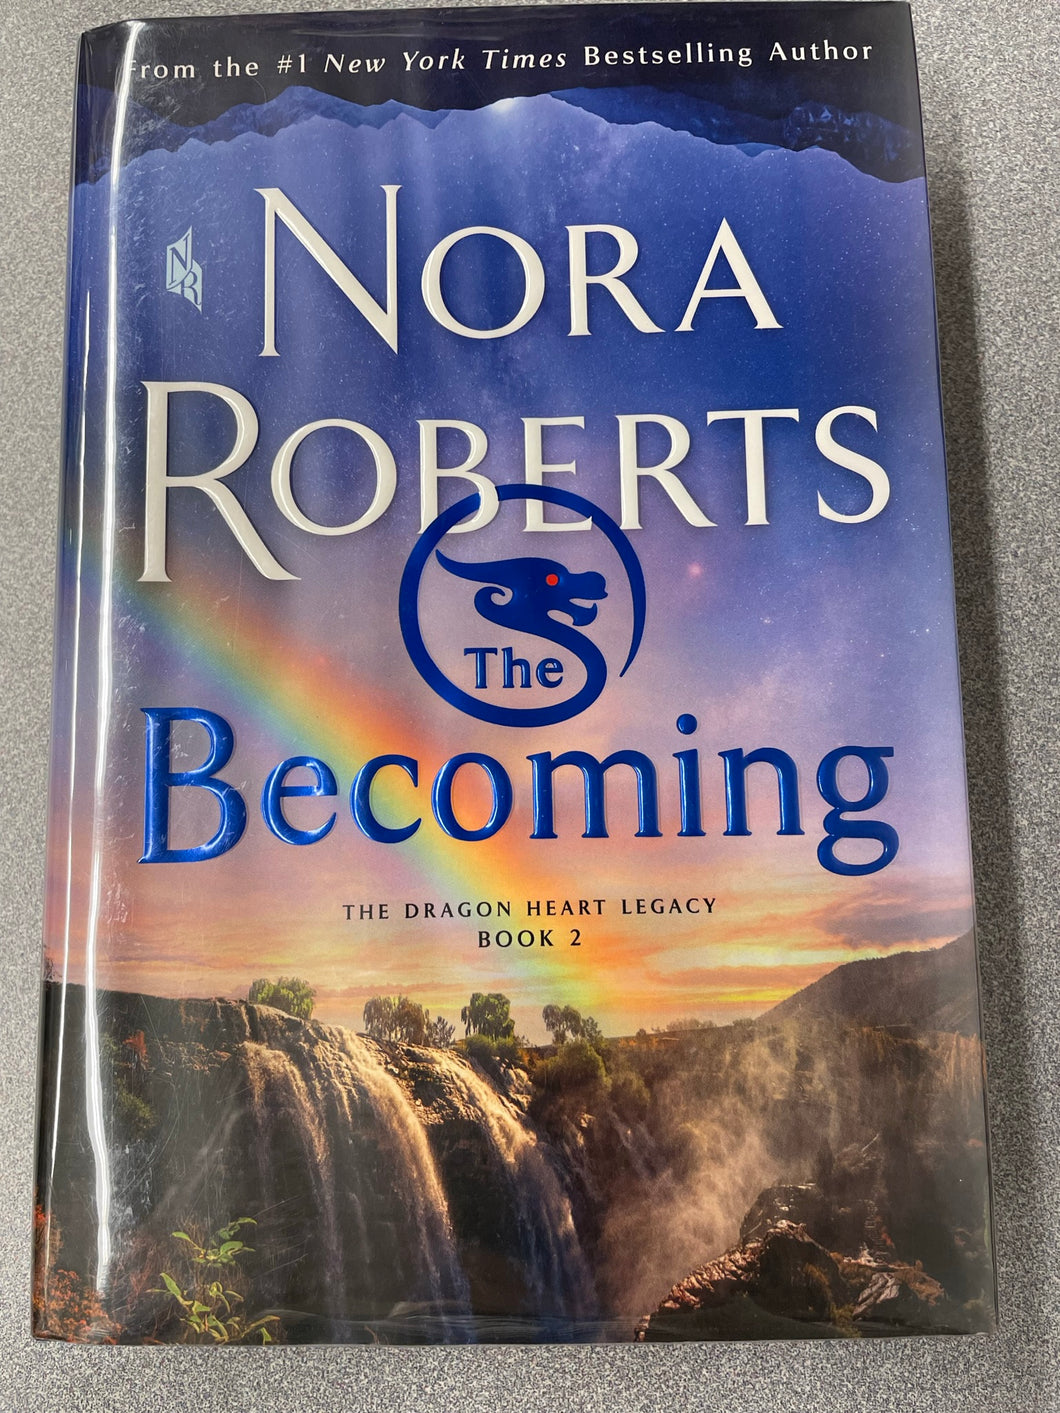 Roberts, Nora, The Becoming: The Dragon Heart Legacy Book 2 [2021] R 9/23